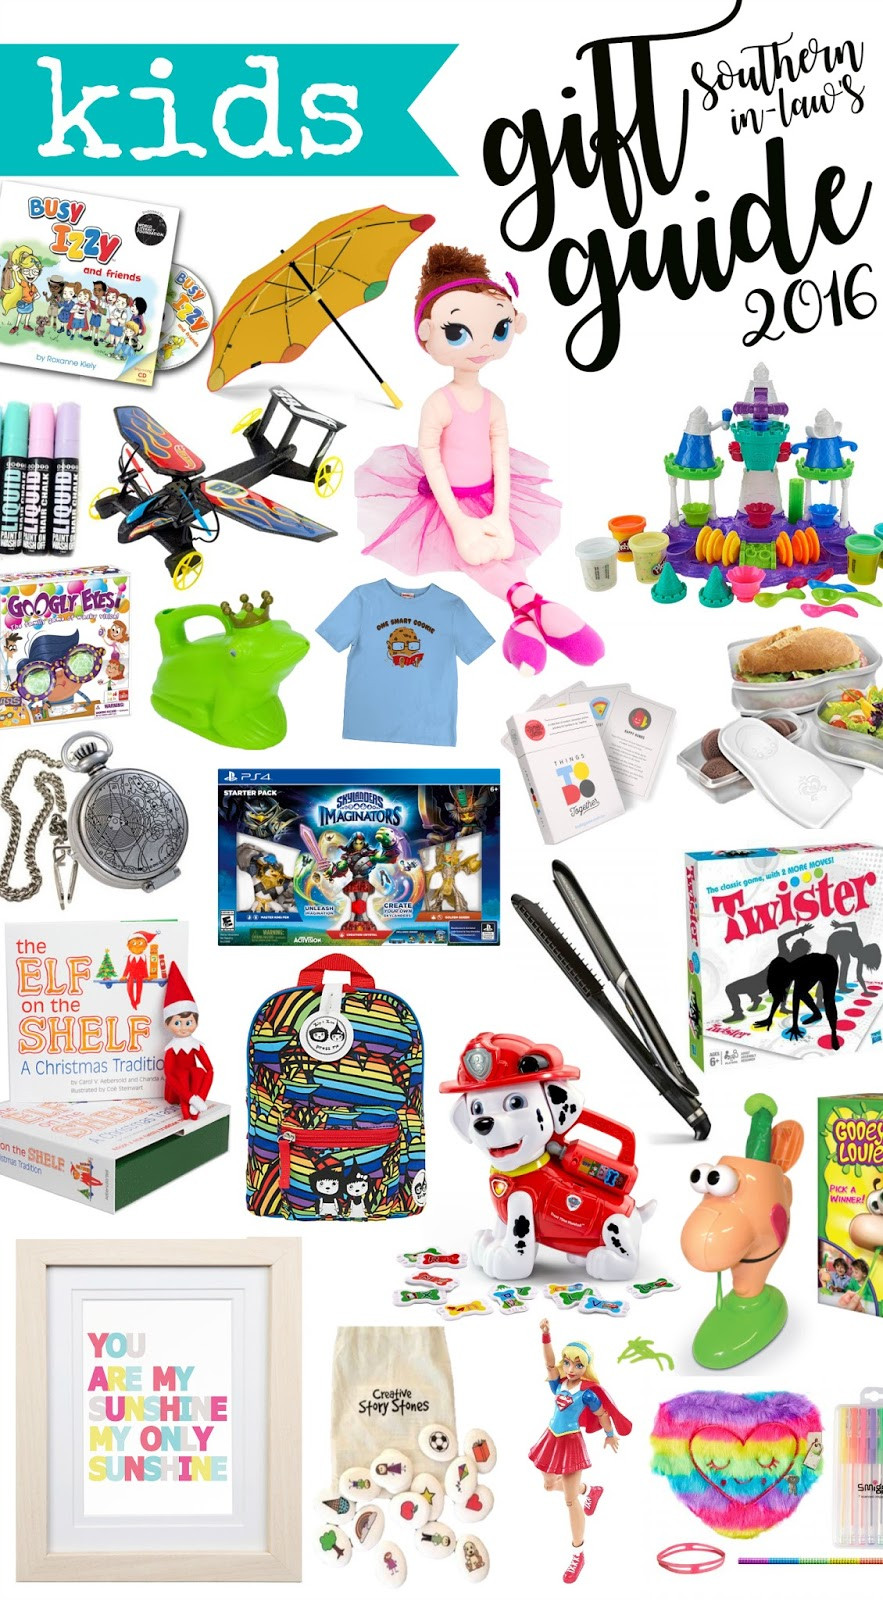 Kids Gifts For Christmas
 Southern In Law 2016 Kids Christmas Gift Guide